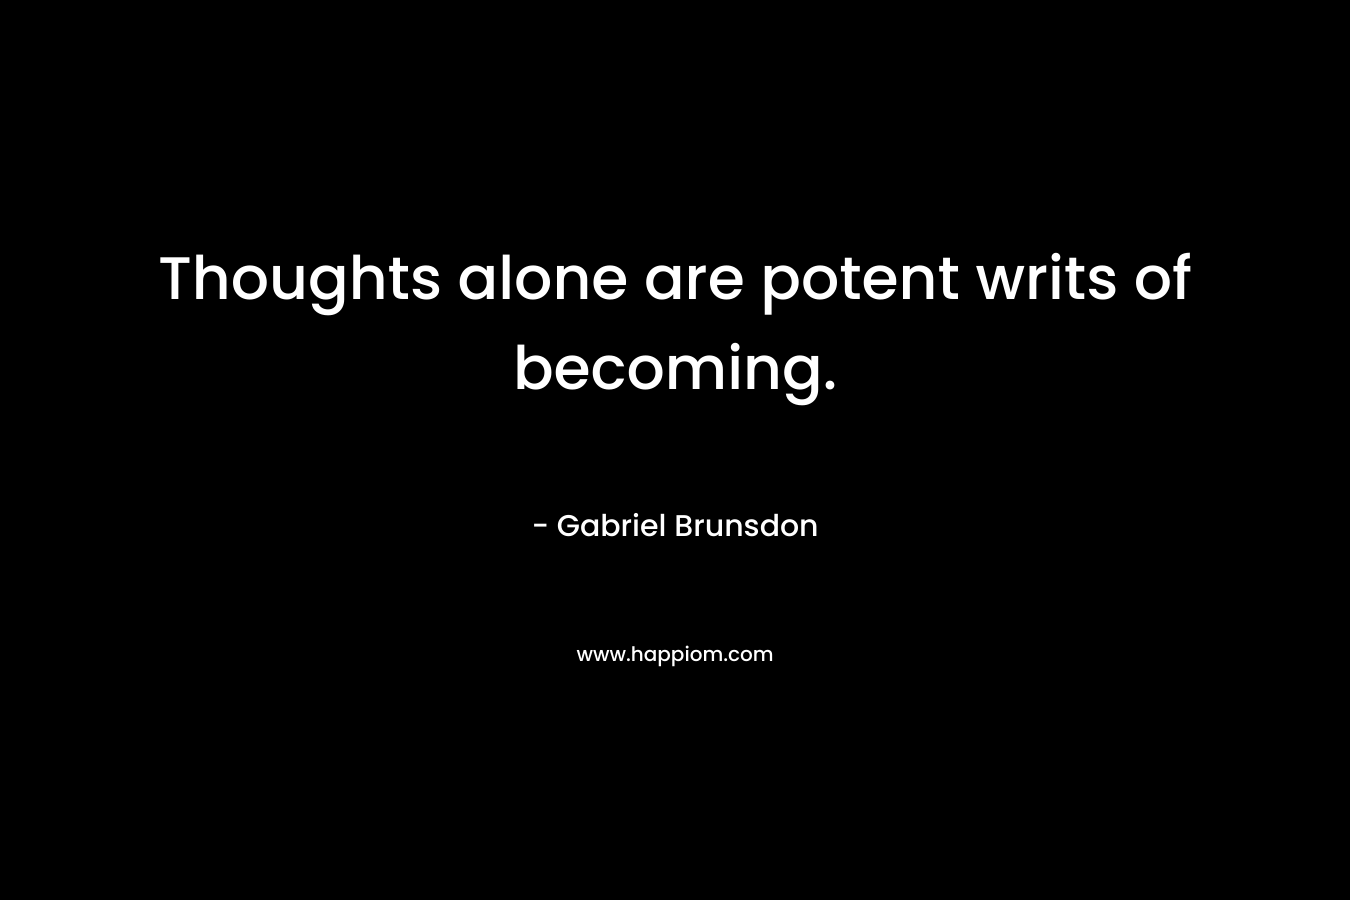 Thoughts alone are potent writs of becoming.